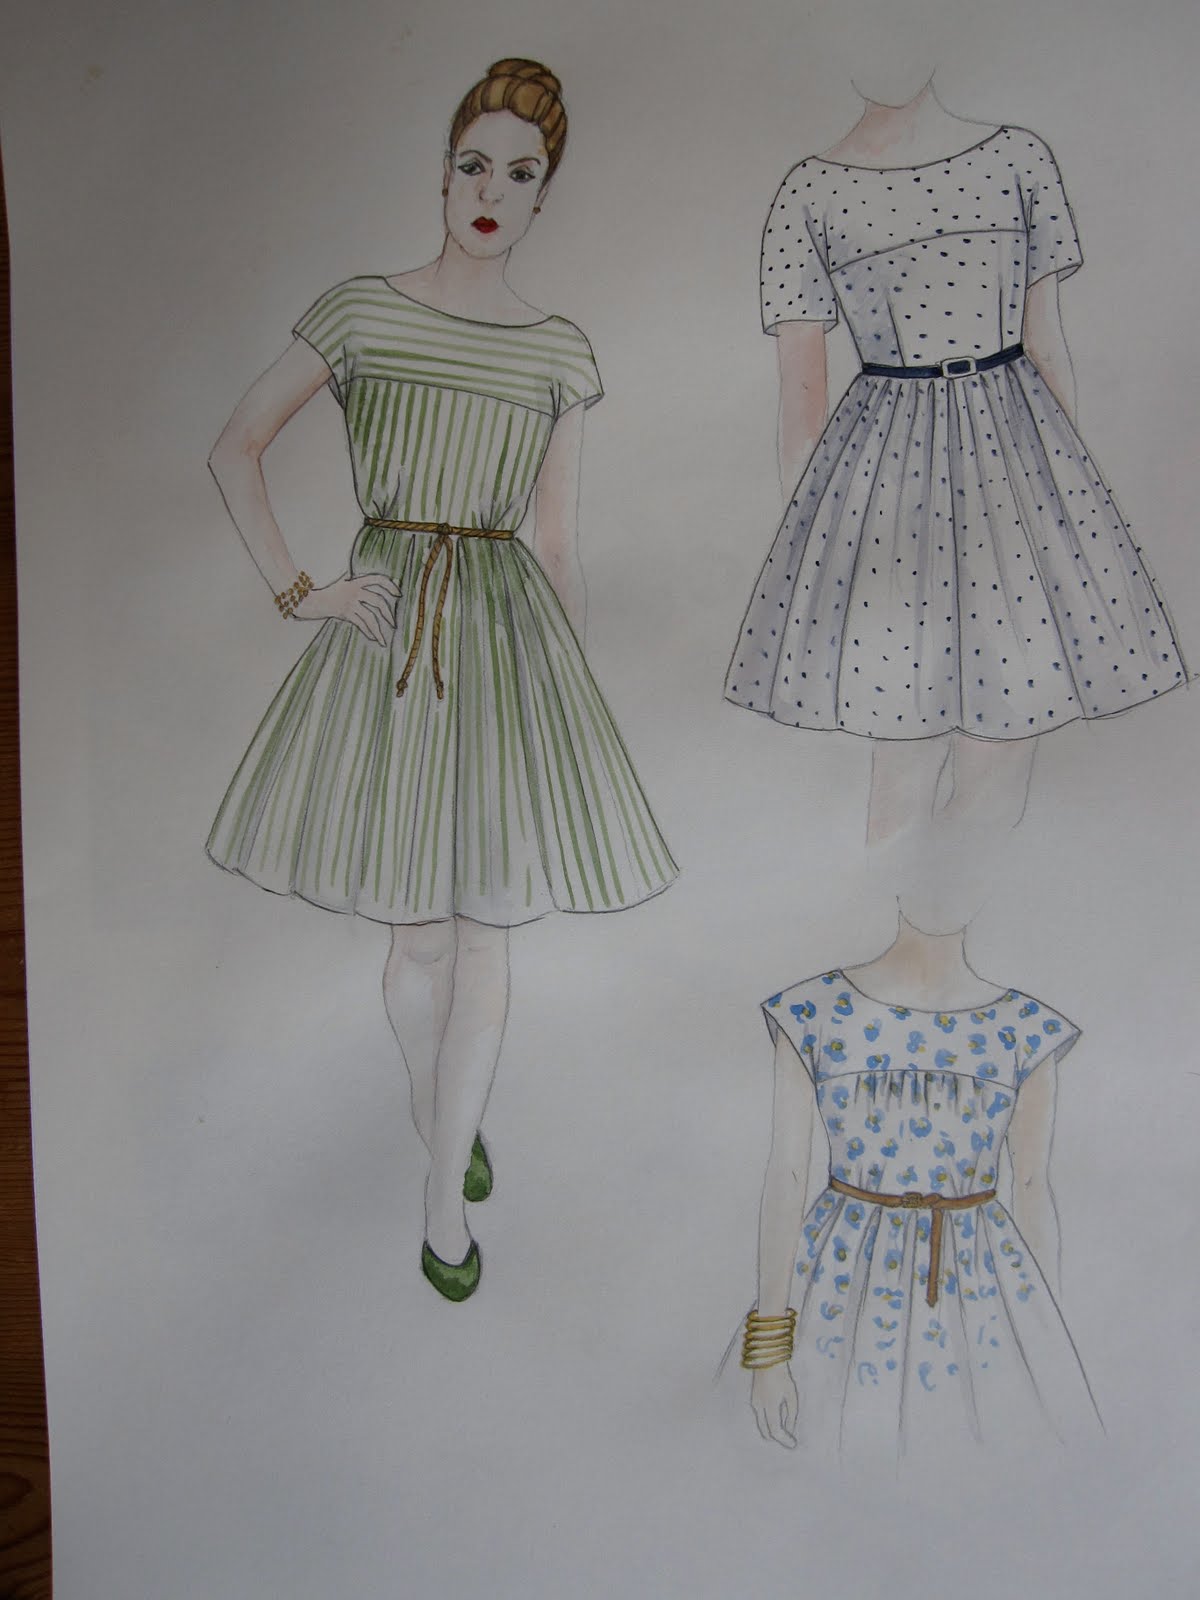 Goldfinch and Eagle: Final boat-neck, cap-sleeve dress designs